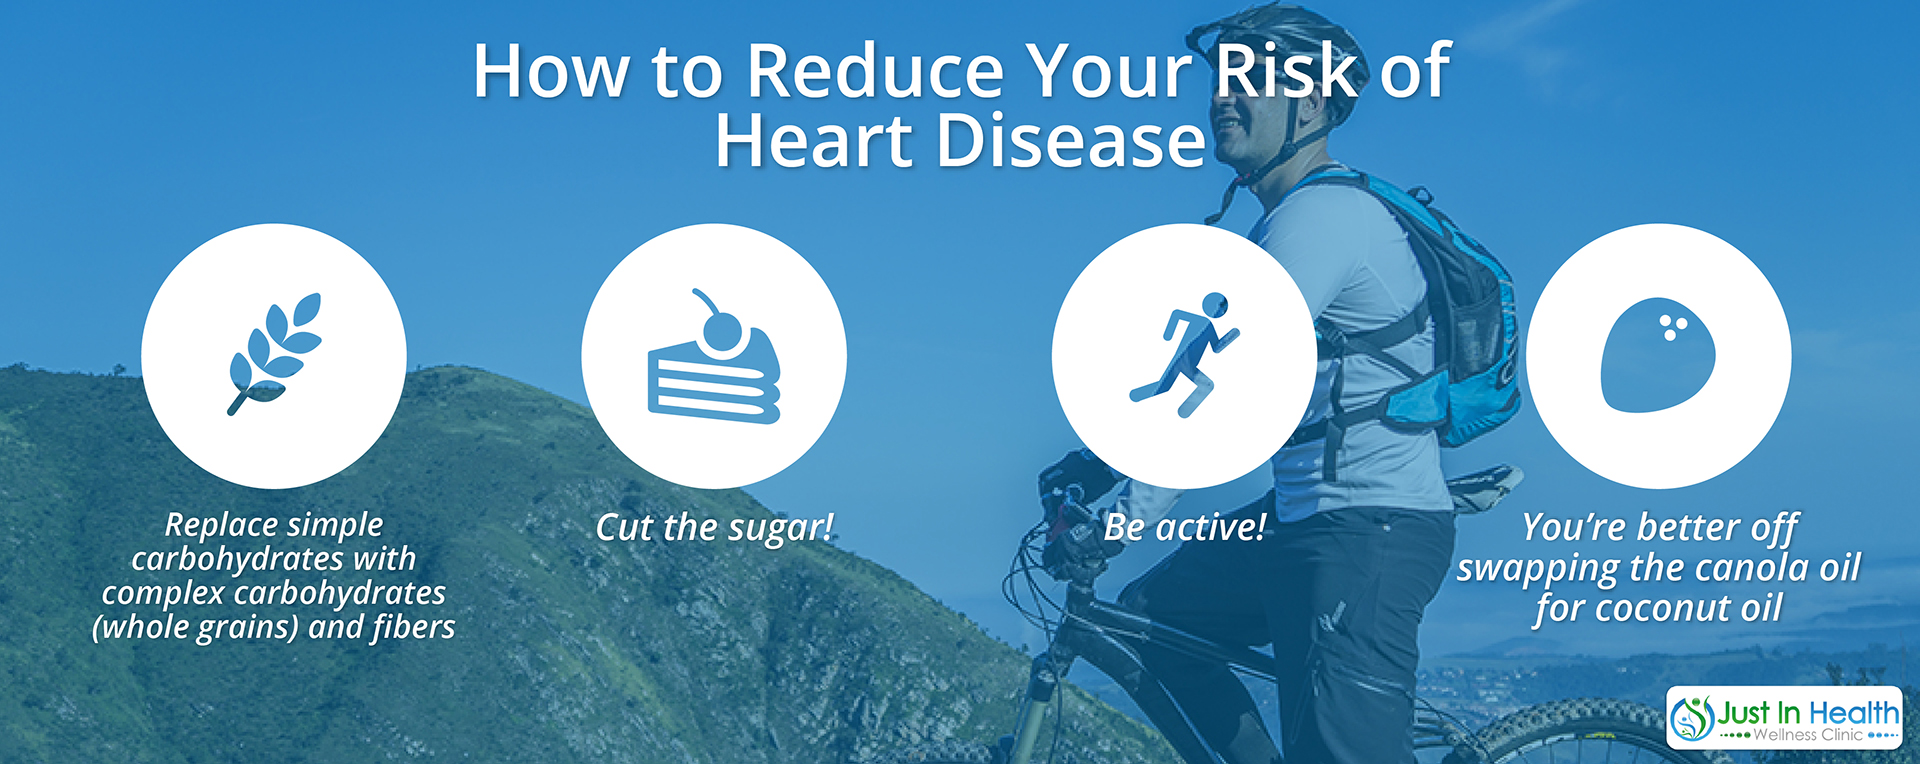 How To Reduce Risk Of Heart Disease